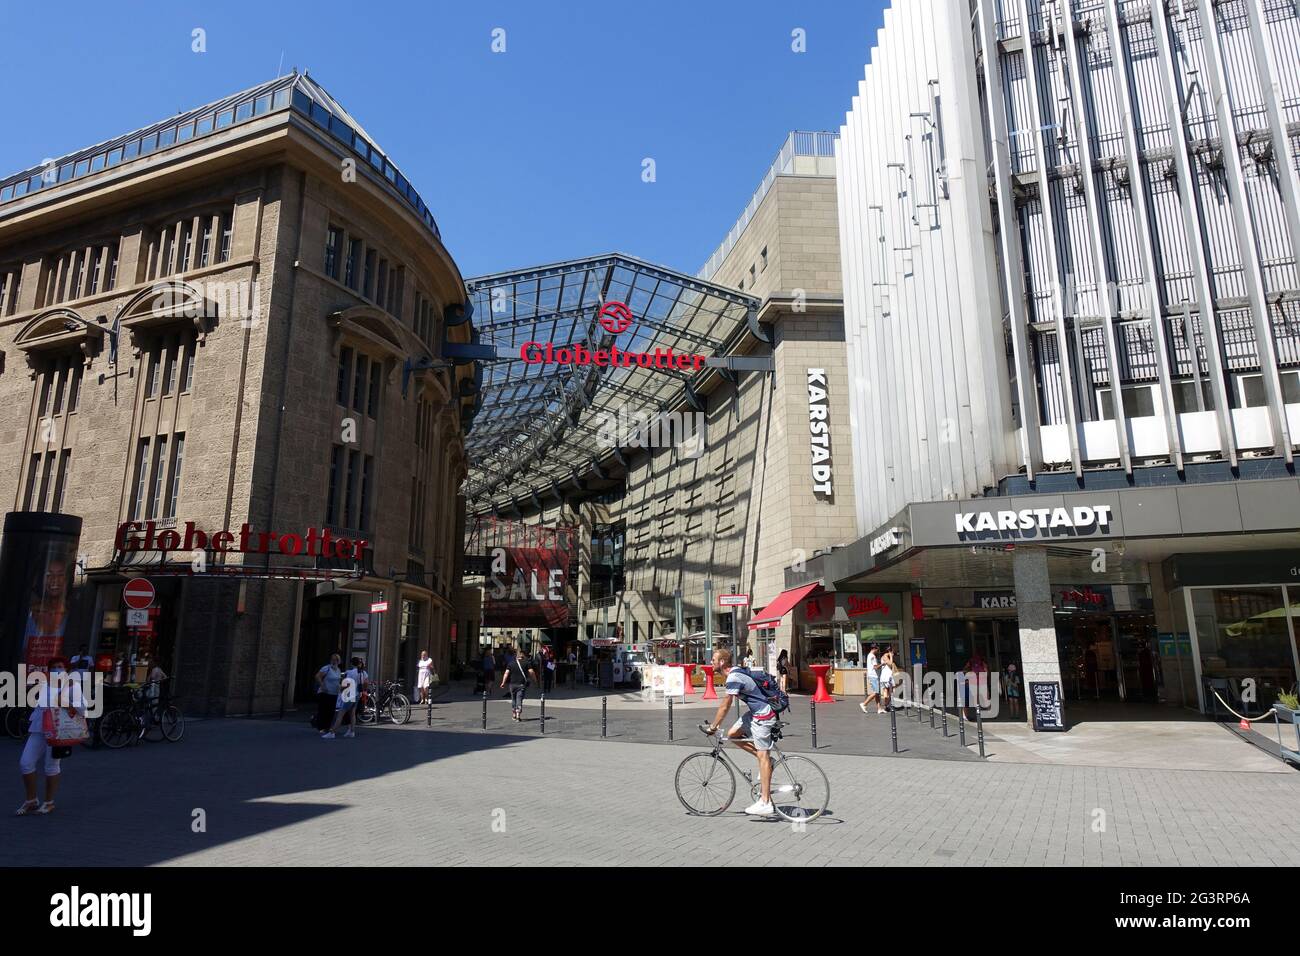 Karstadt (now Galeria) and Globetrotter department shops in Cologne city centre Stock Photo